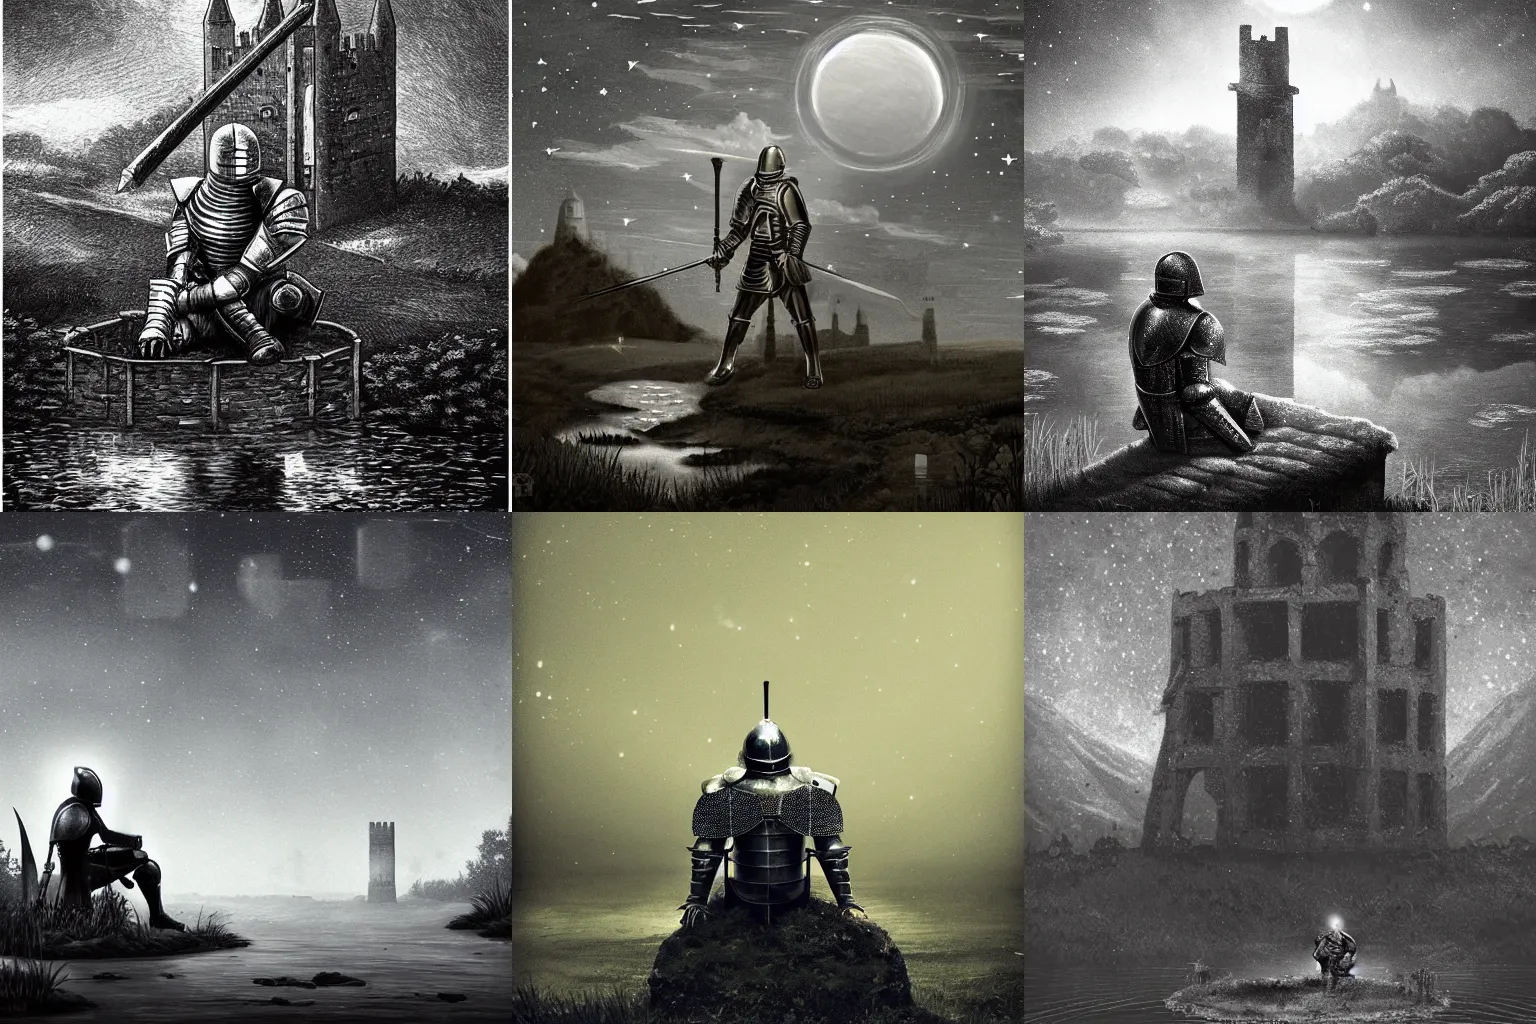 Prompt: a knight in full plate armor, sitting on his knees in a small pond, with a crumbling tower in the background, and stars in the night sky. Monochromatic, dreamlike, by Hakob Minasian